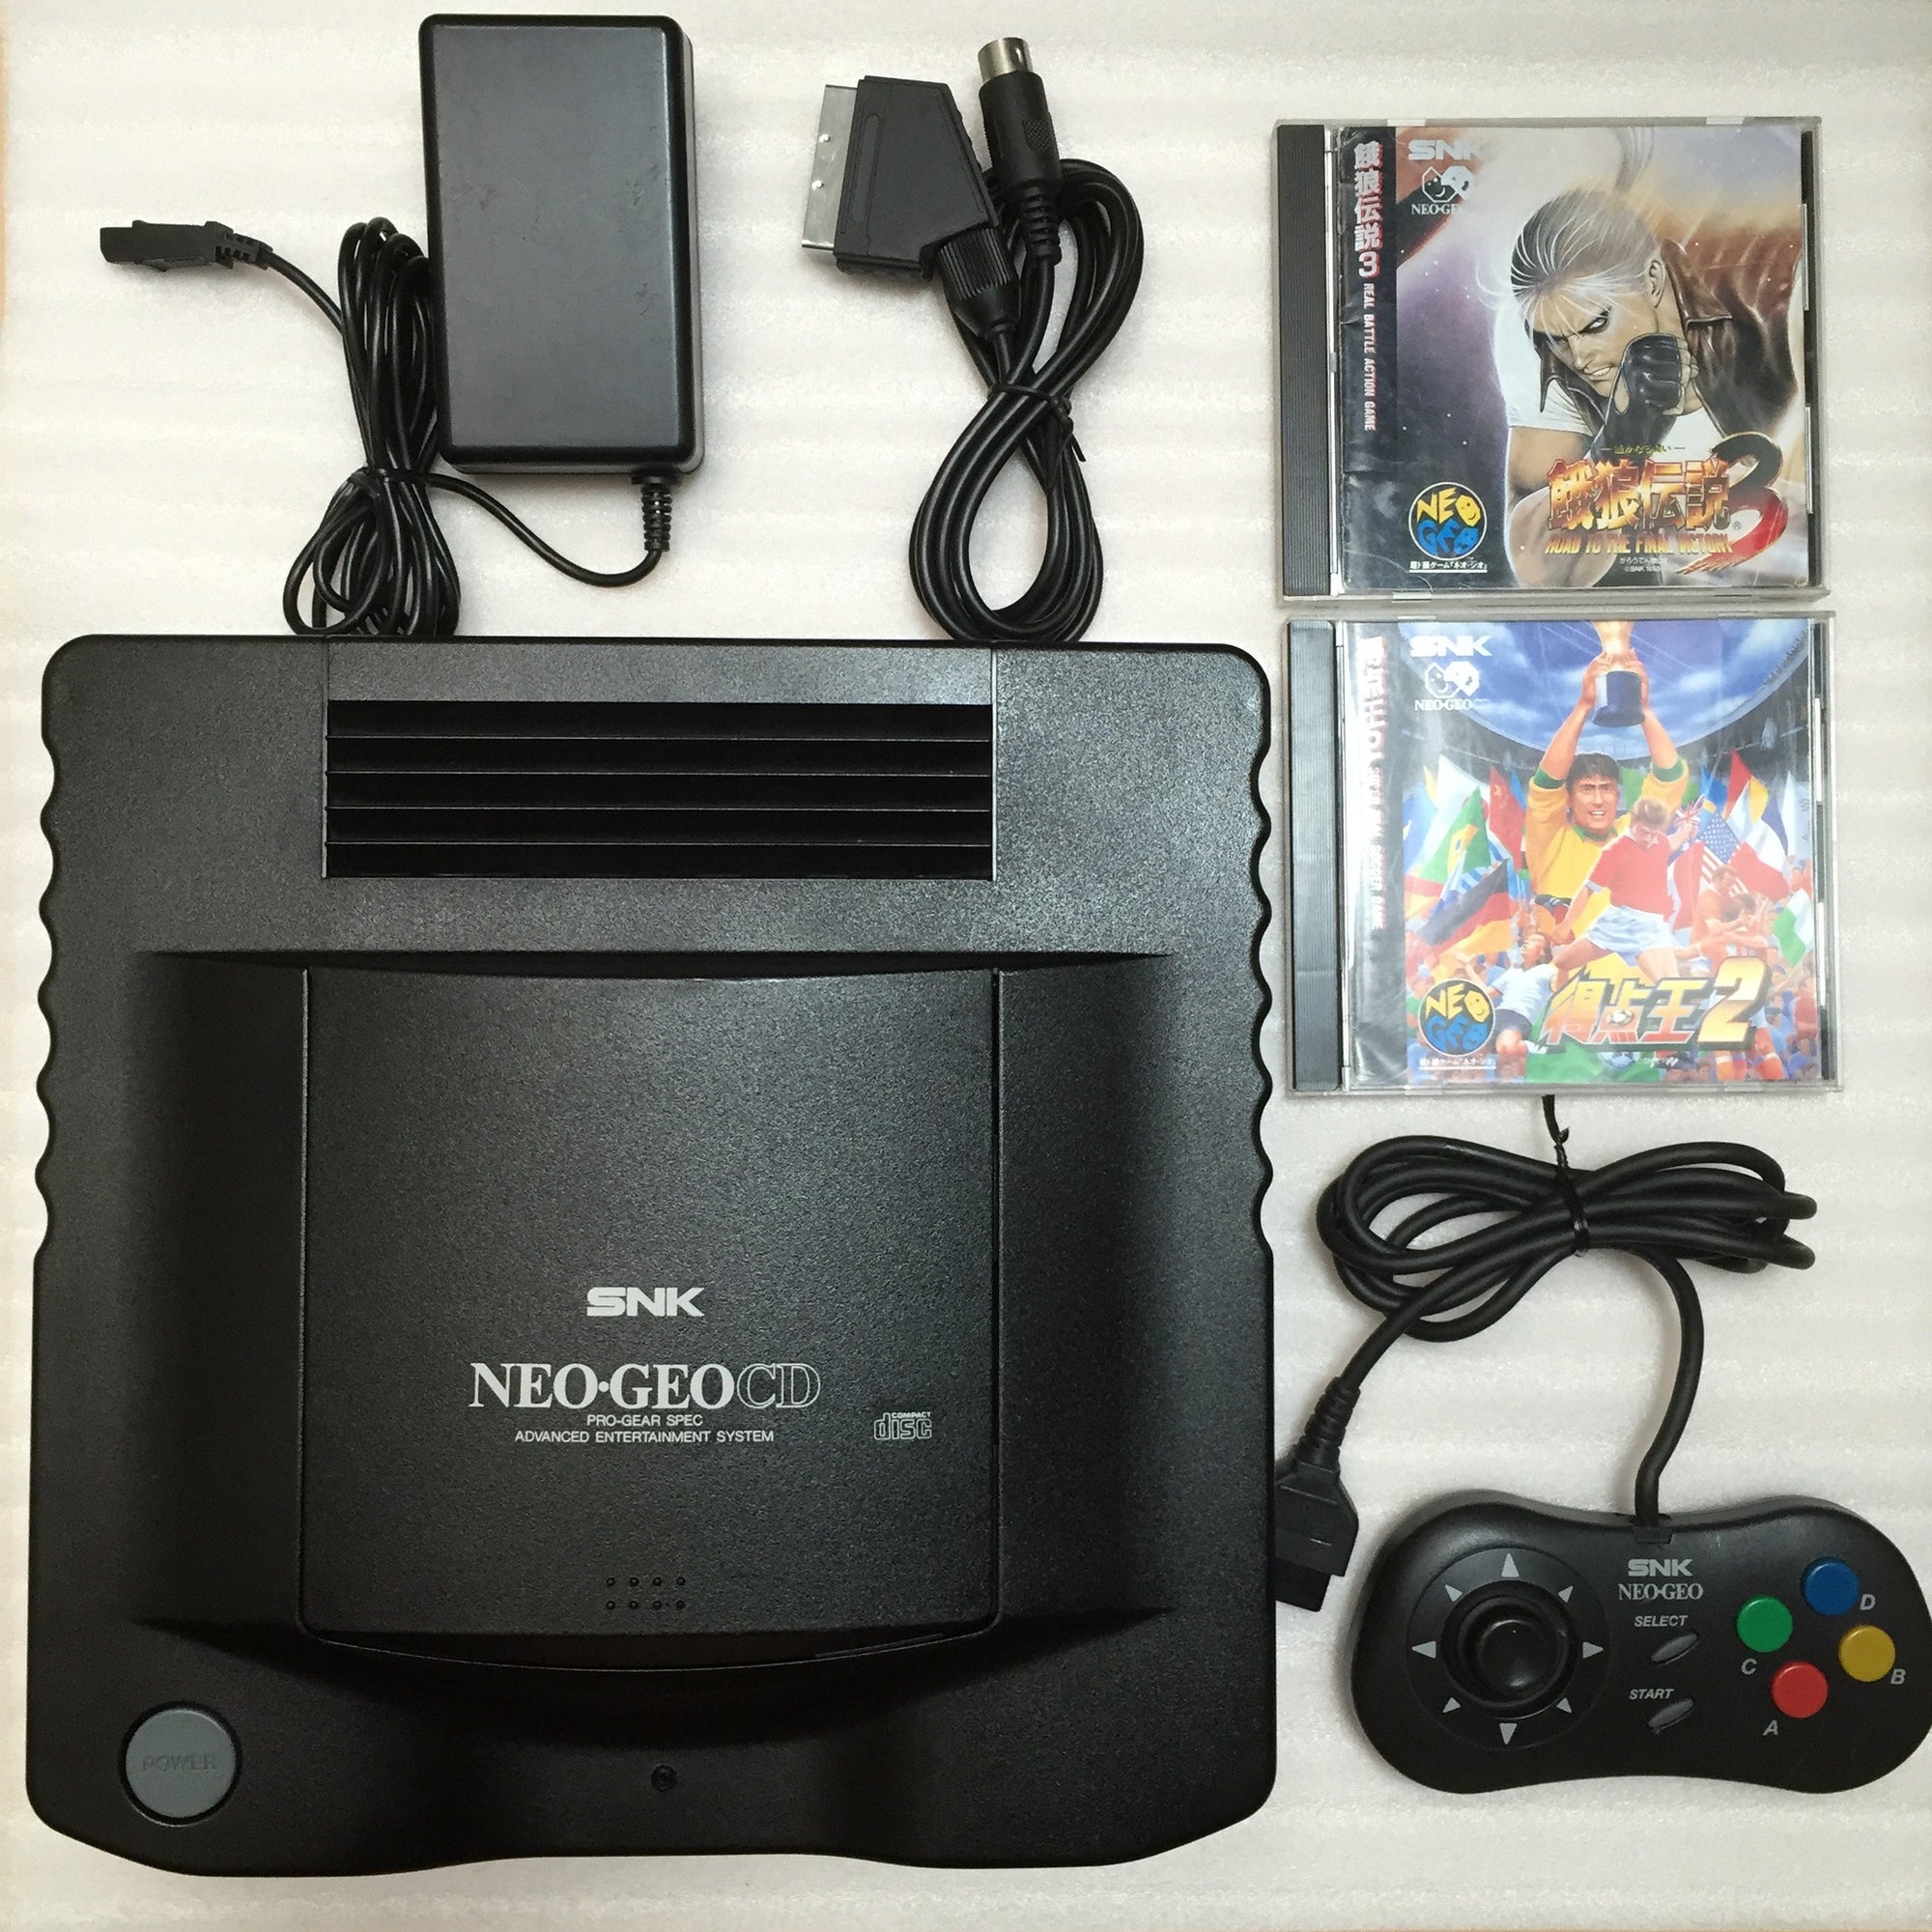 NeoGeo CD System + 2 games and RGB cable set